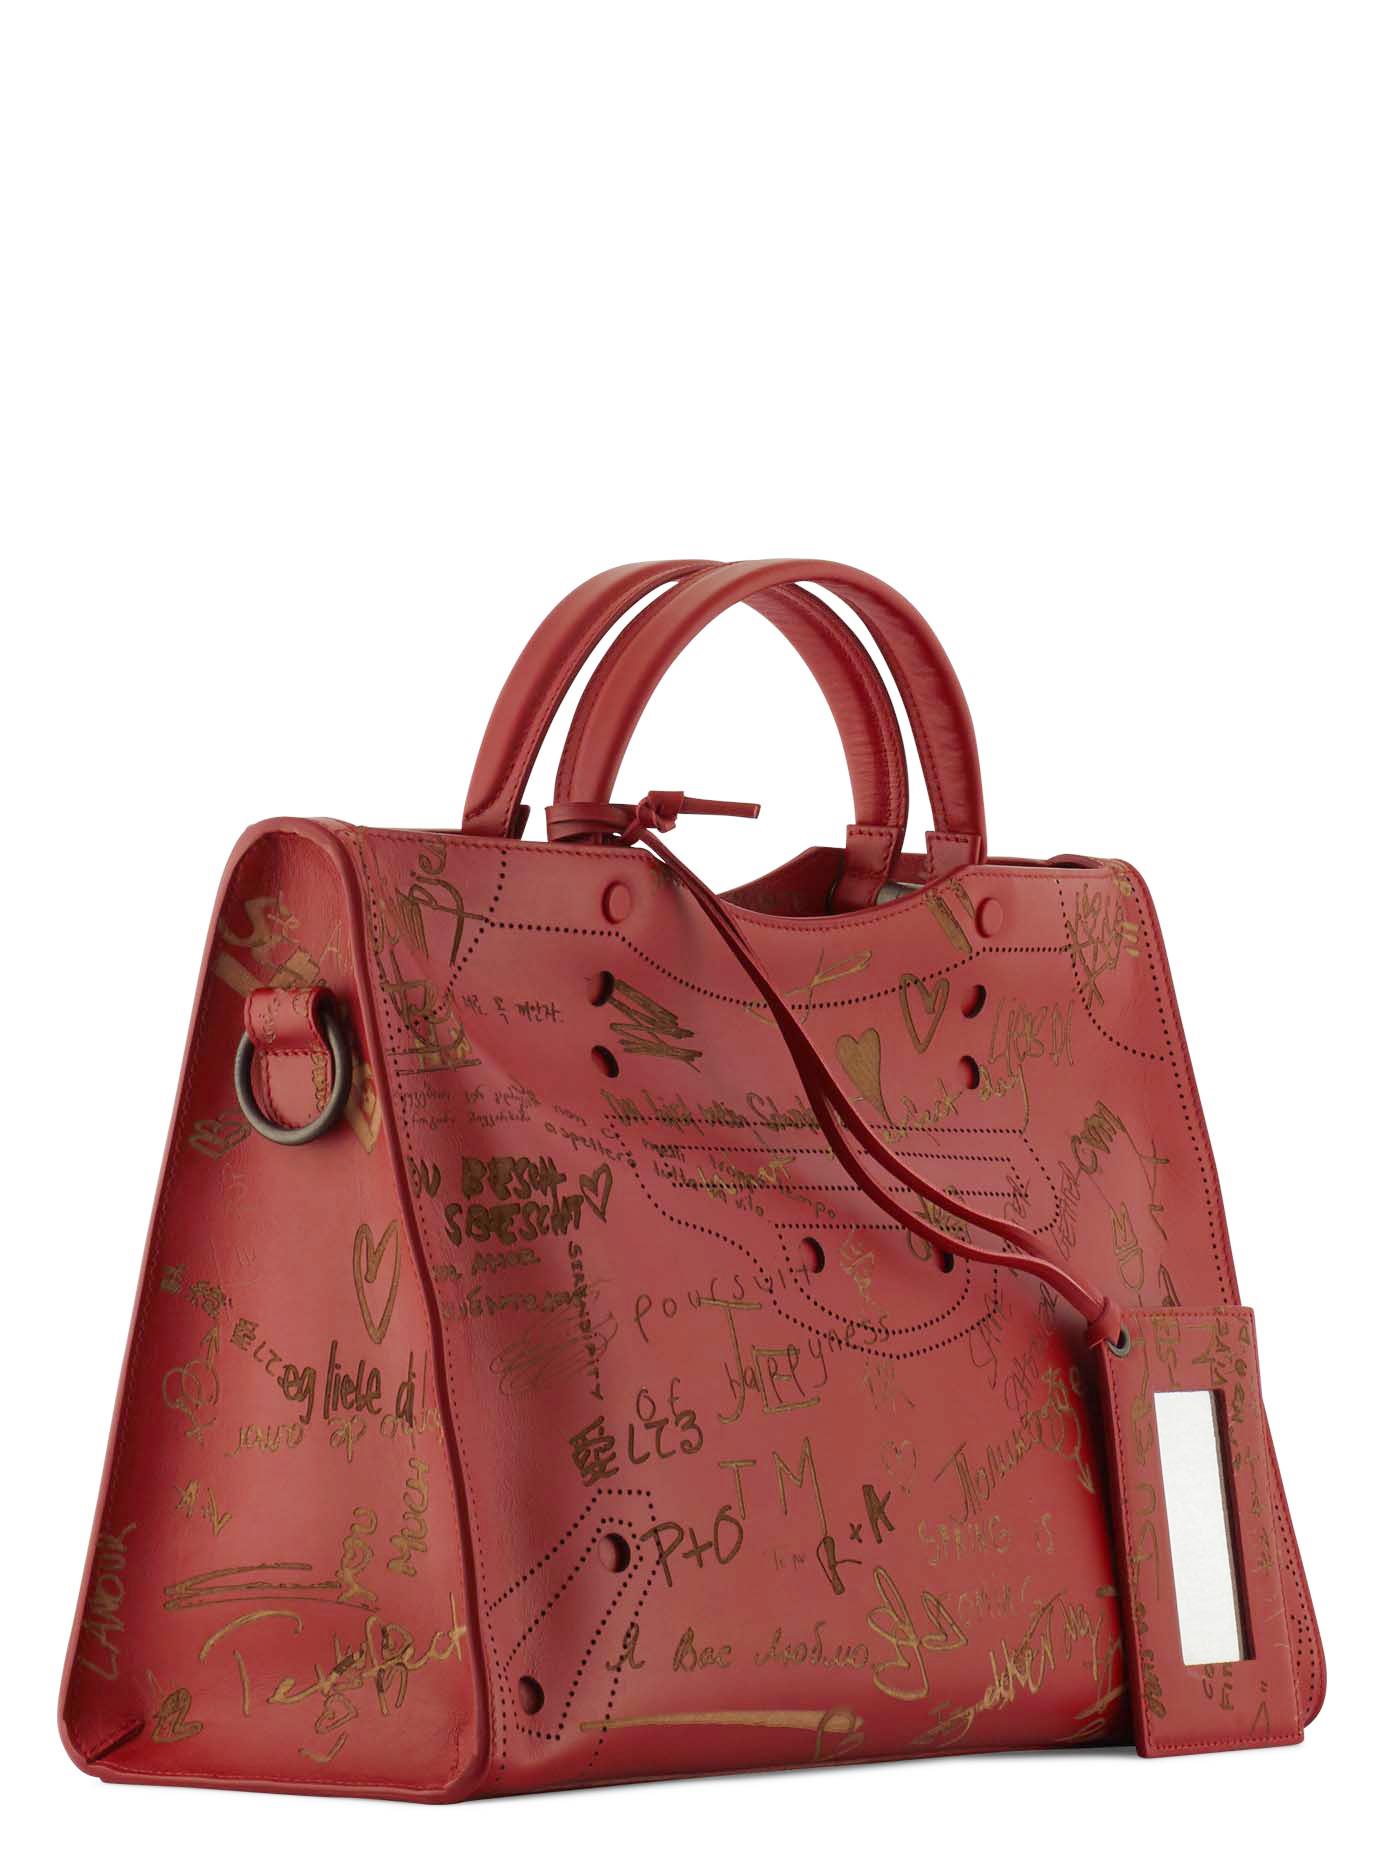 Lyst - Balenciaga Blackout City Love Leather Bag in Red